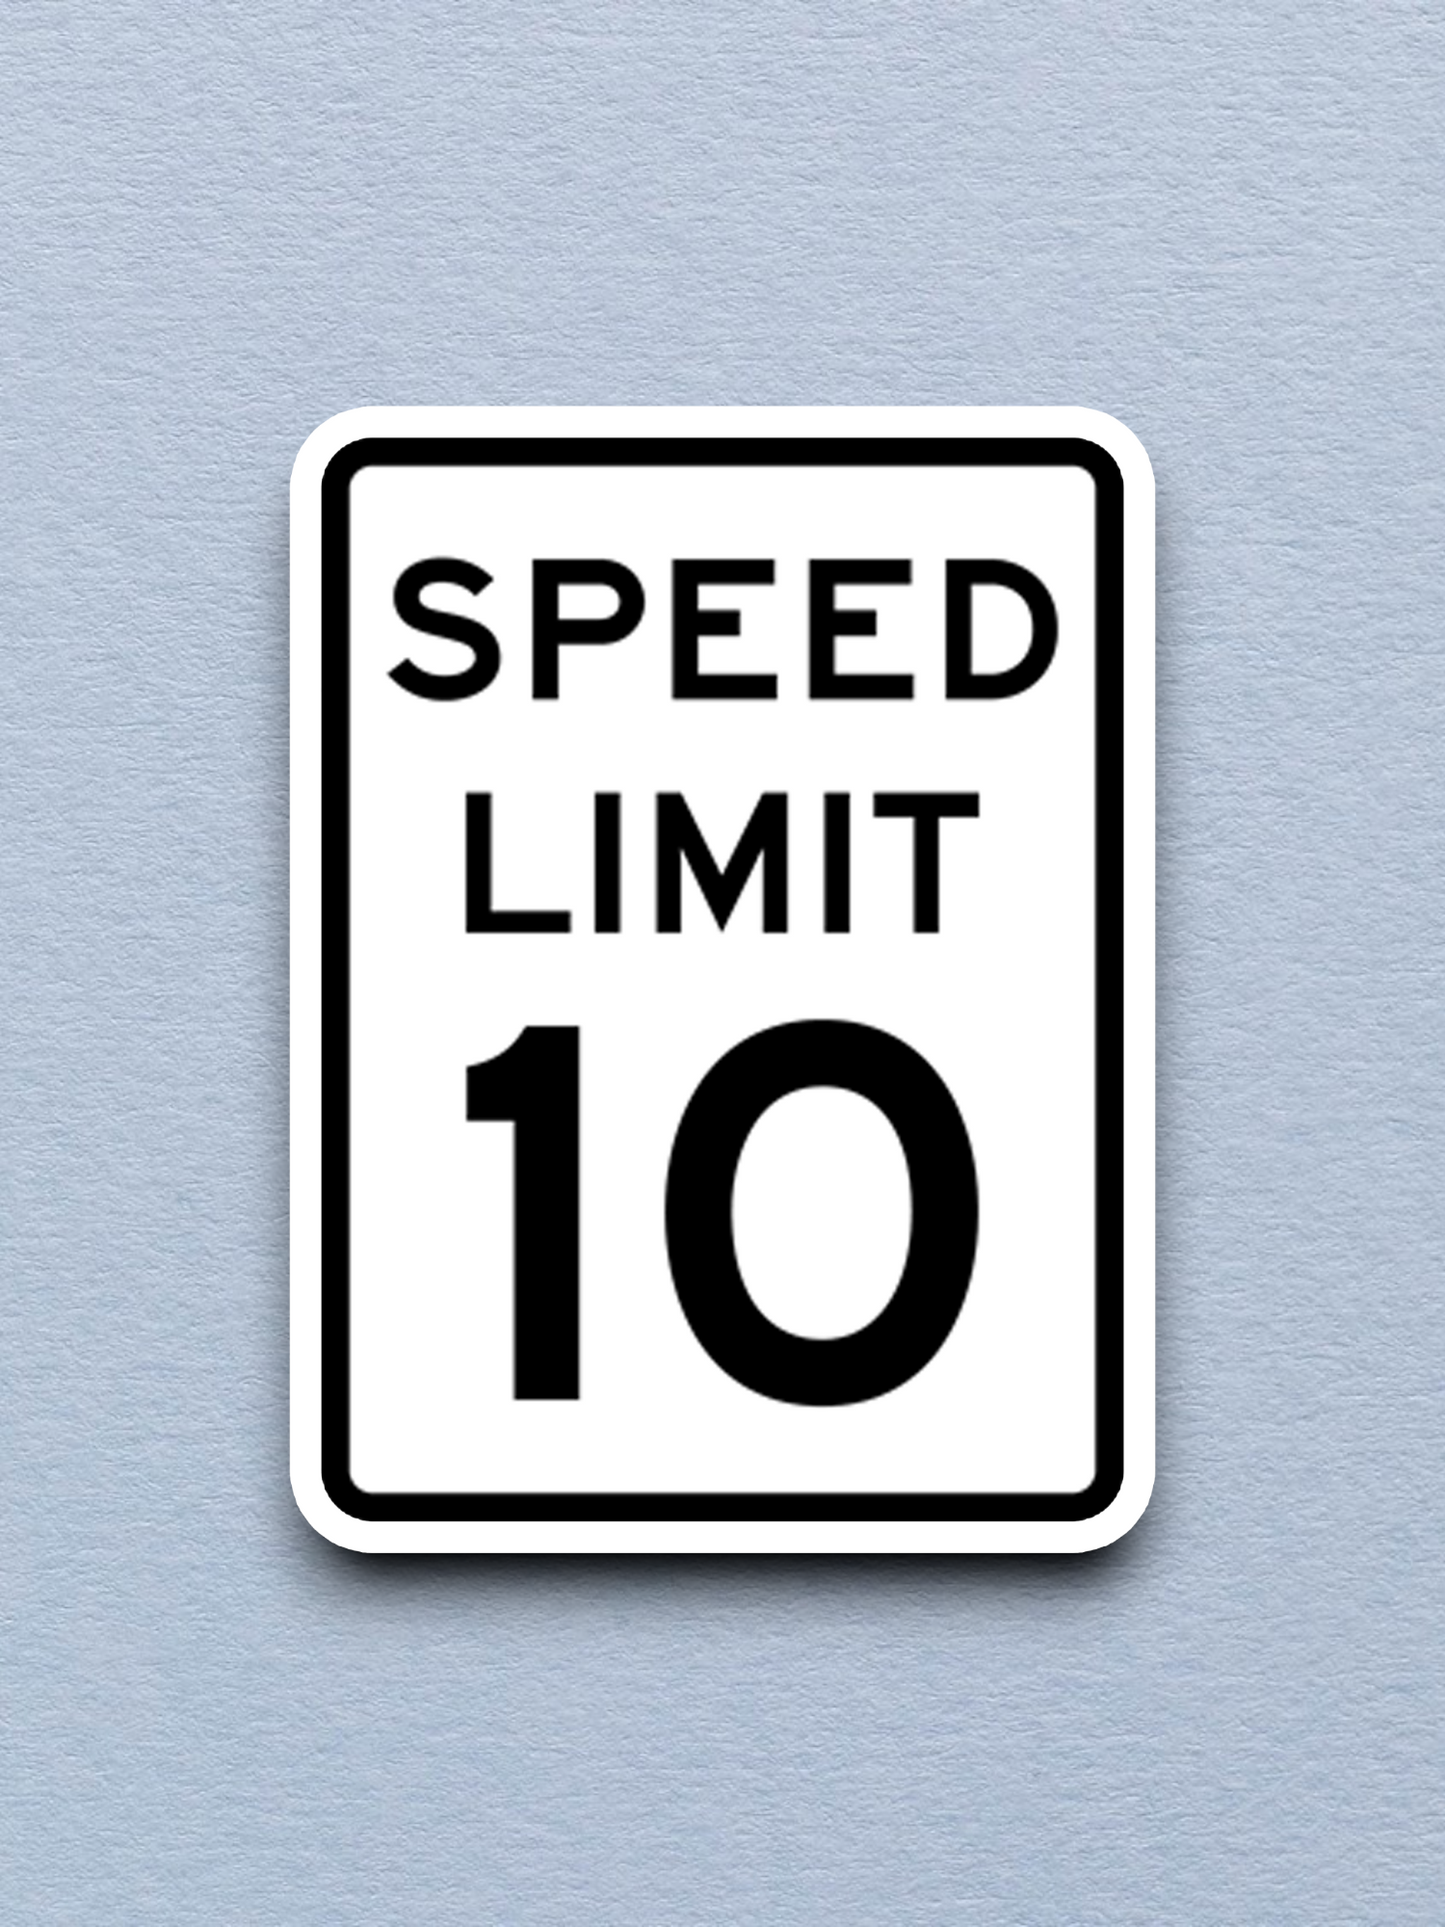 10 Miles Per Hour Speed Limit Road Sign Sticker